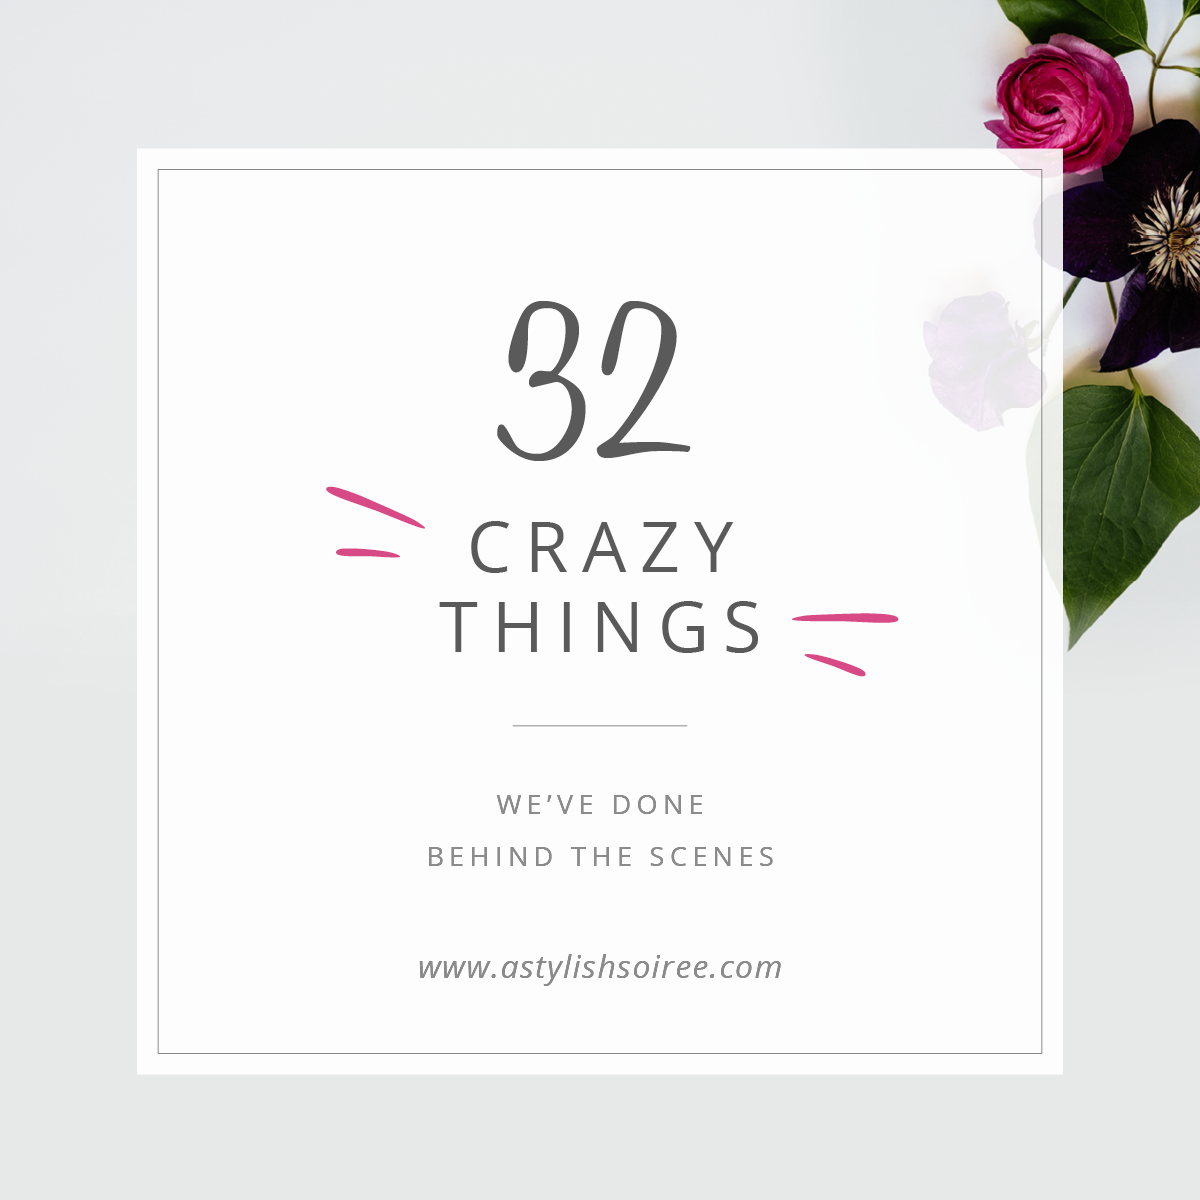 Dallas Wedding Planner | Behind the Scenes: 25 Things Your Wedding Planner Will Do That You Won't Even Know About